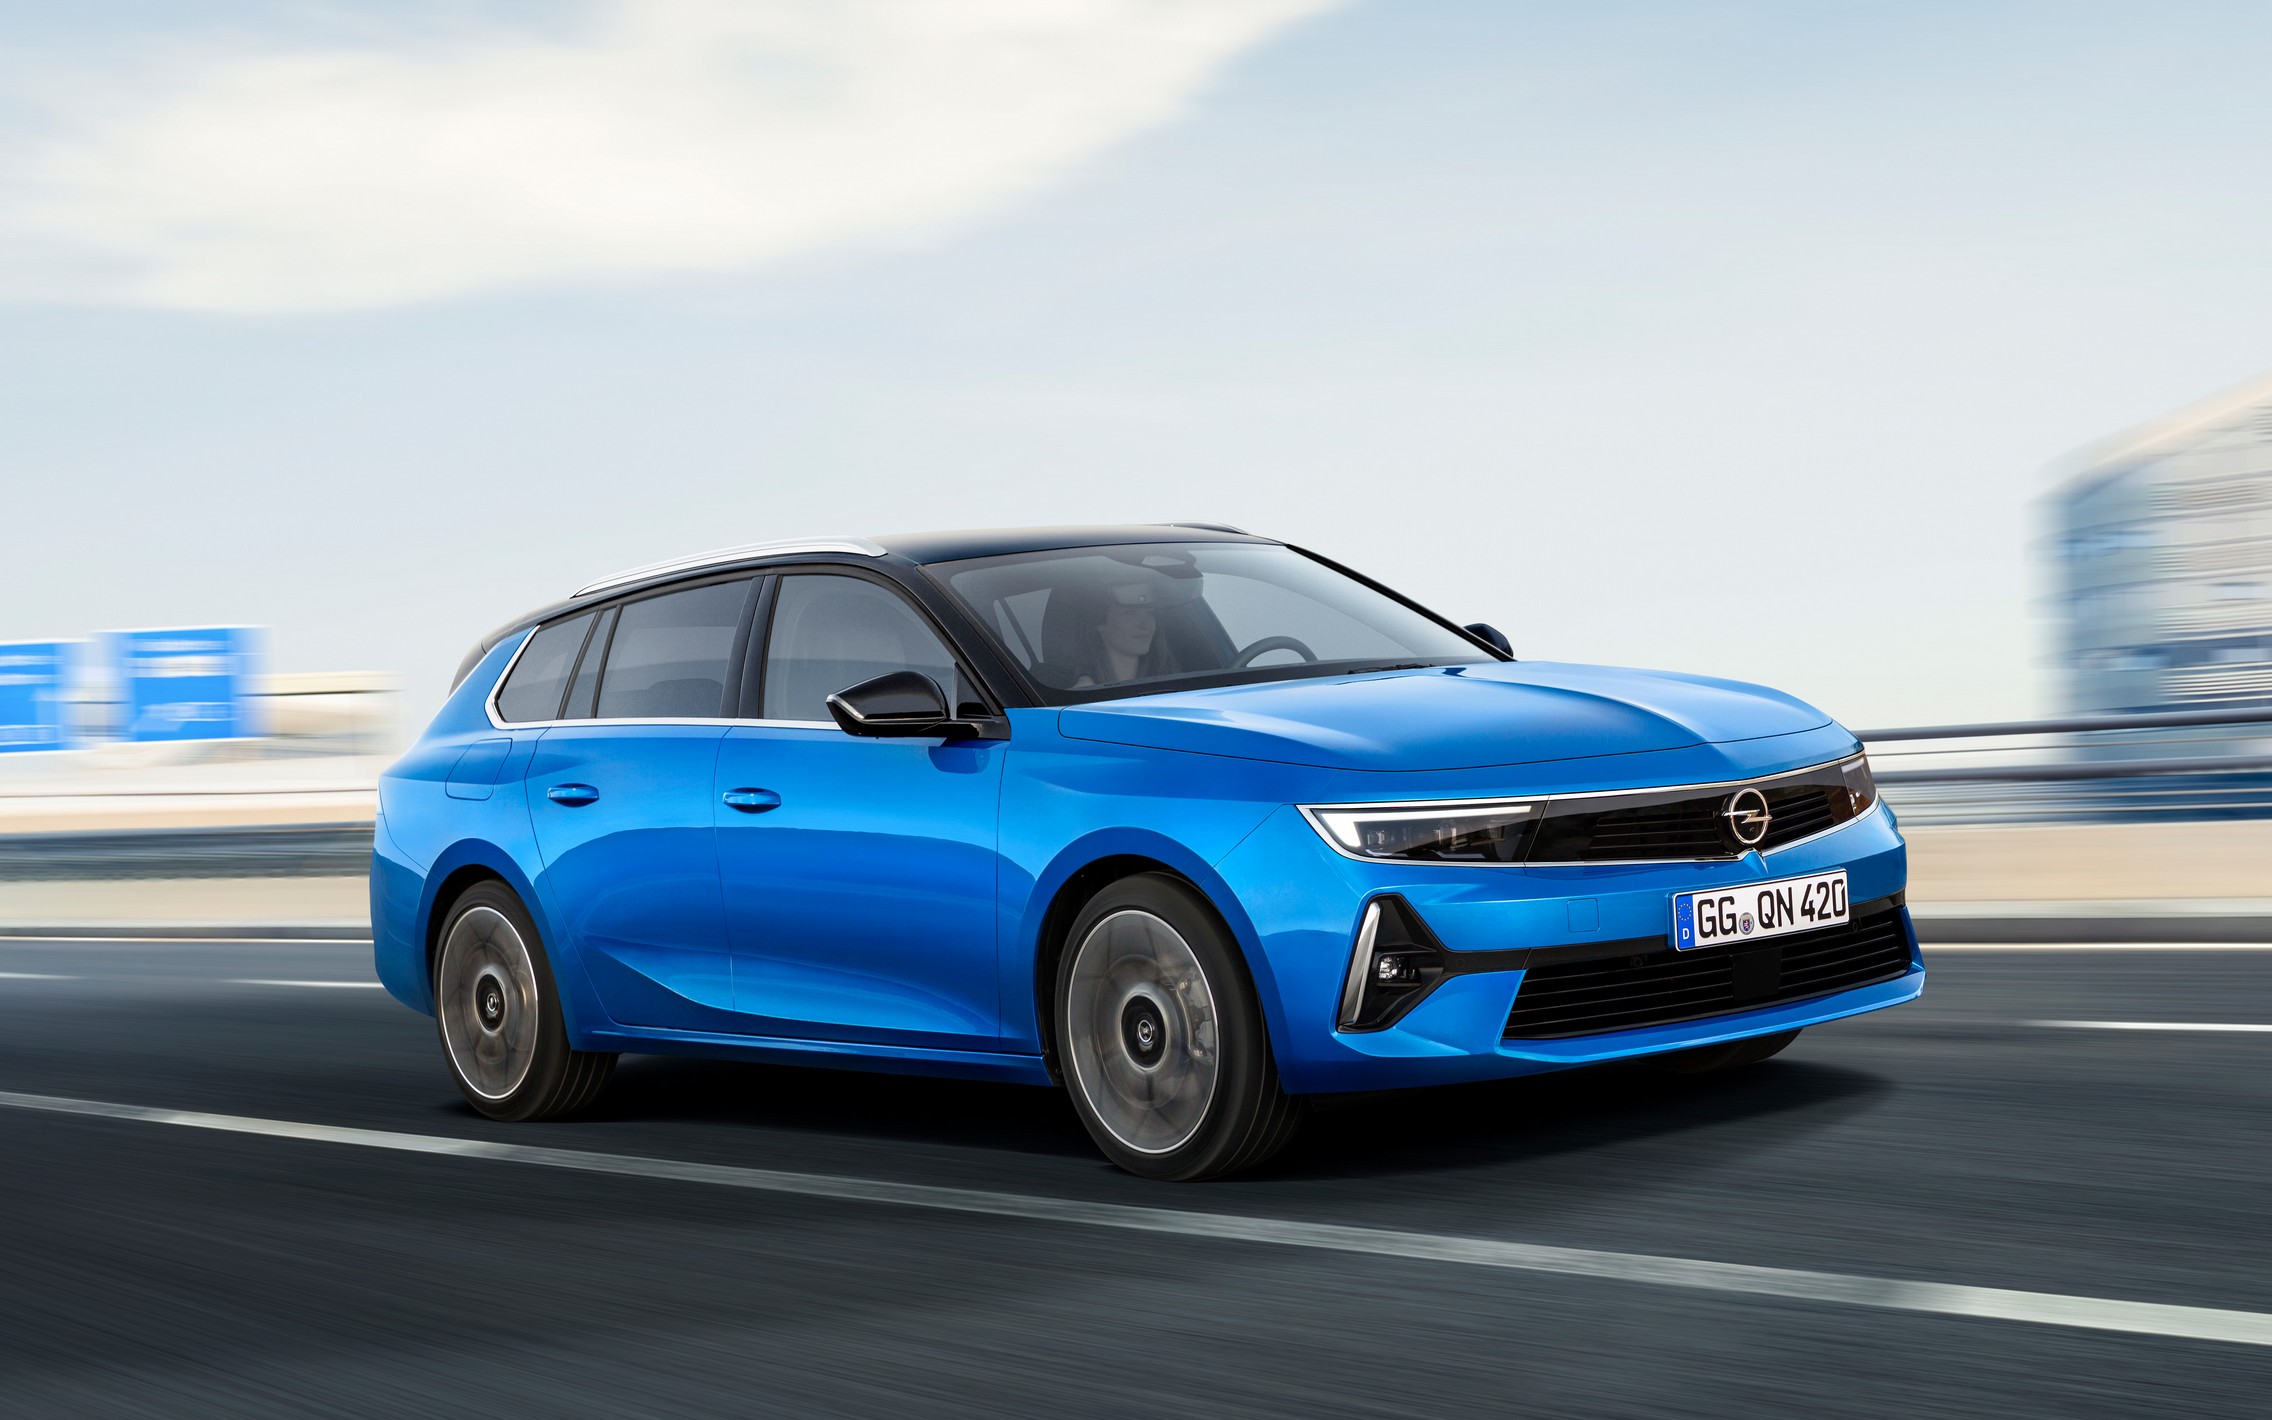 https://s1.cdn.autoevolution.com/images/news/new-opel-astra-sports-tourer-is-purely-designed-as-ice-and-electrified-estate-175444_1.jpg